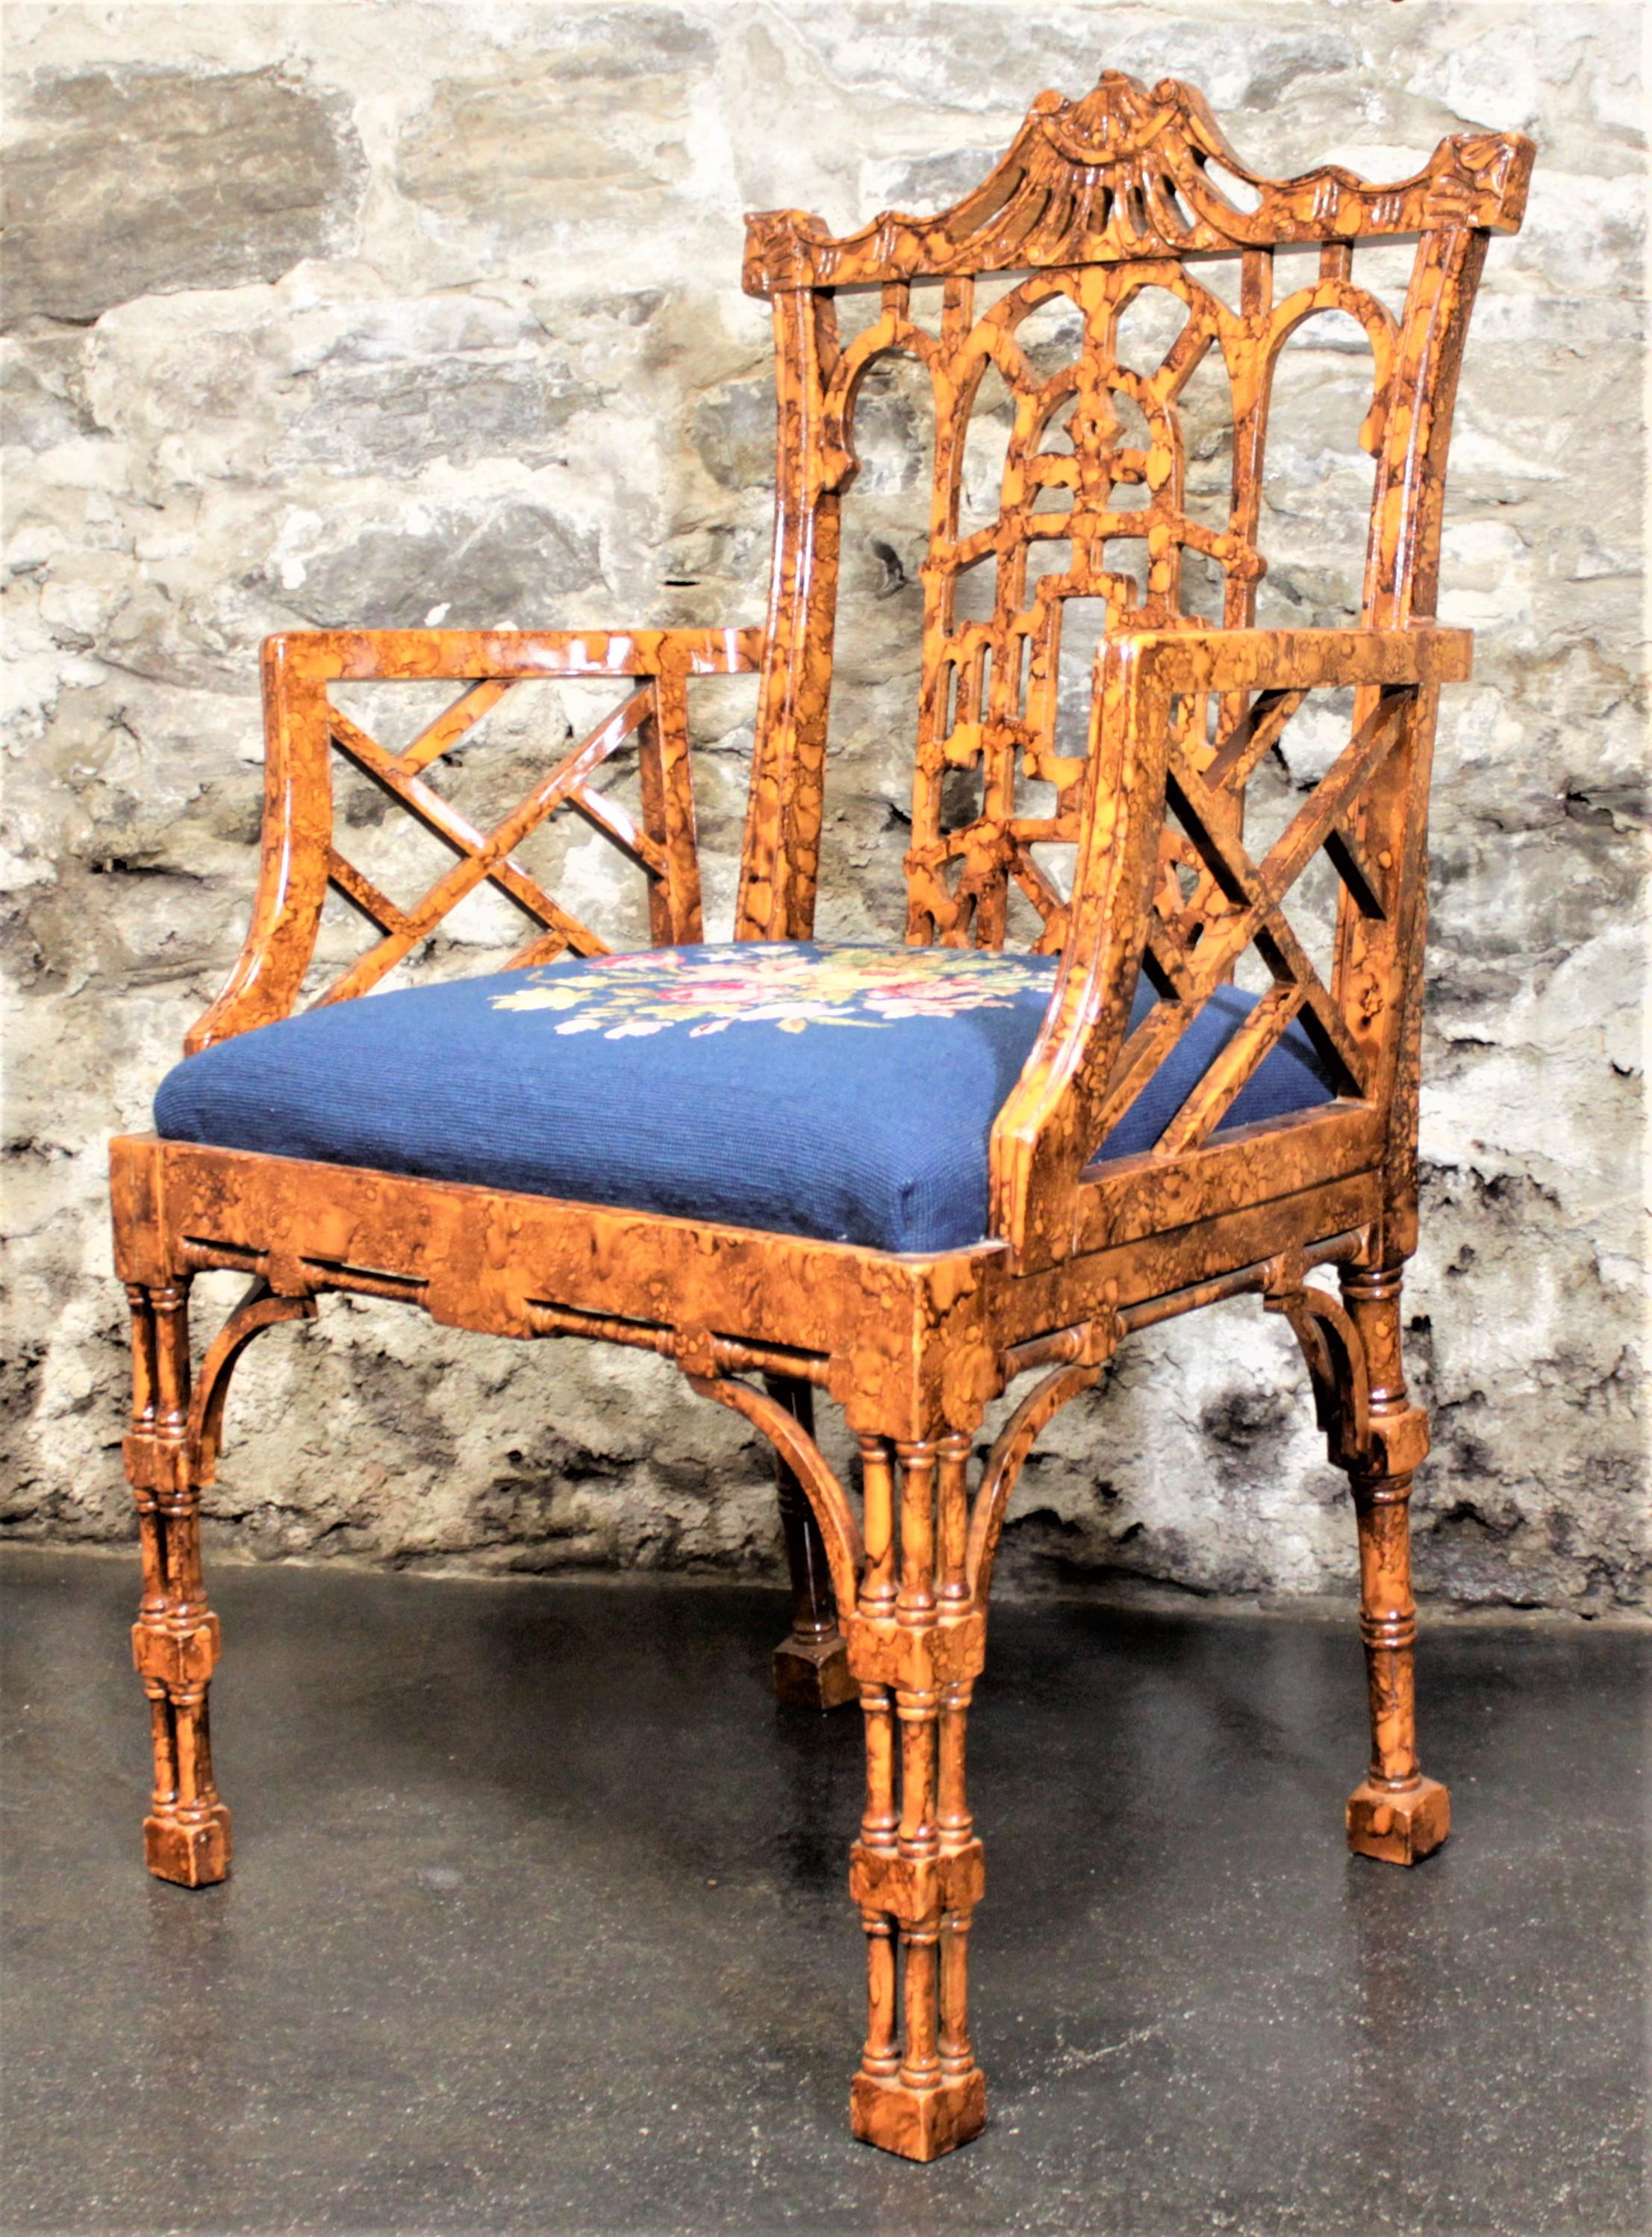 This vintage Chinese Chippendale or Bohemian styled accent chair is presumed to have been manufactured in the United States in circa 1950. The frame is done in a sculptured wood to mimic bamboo stalks and covered with a bright honey amber lacquer